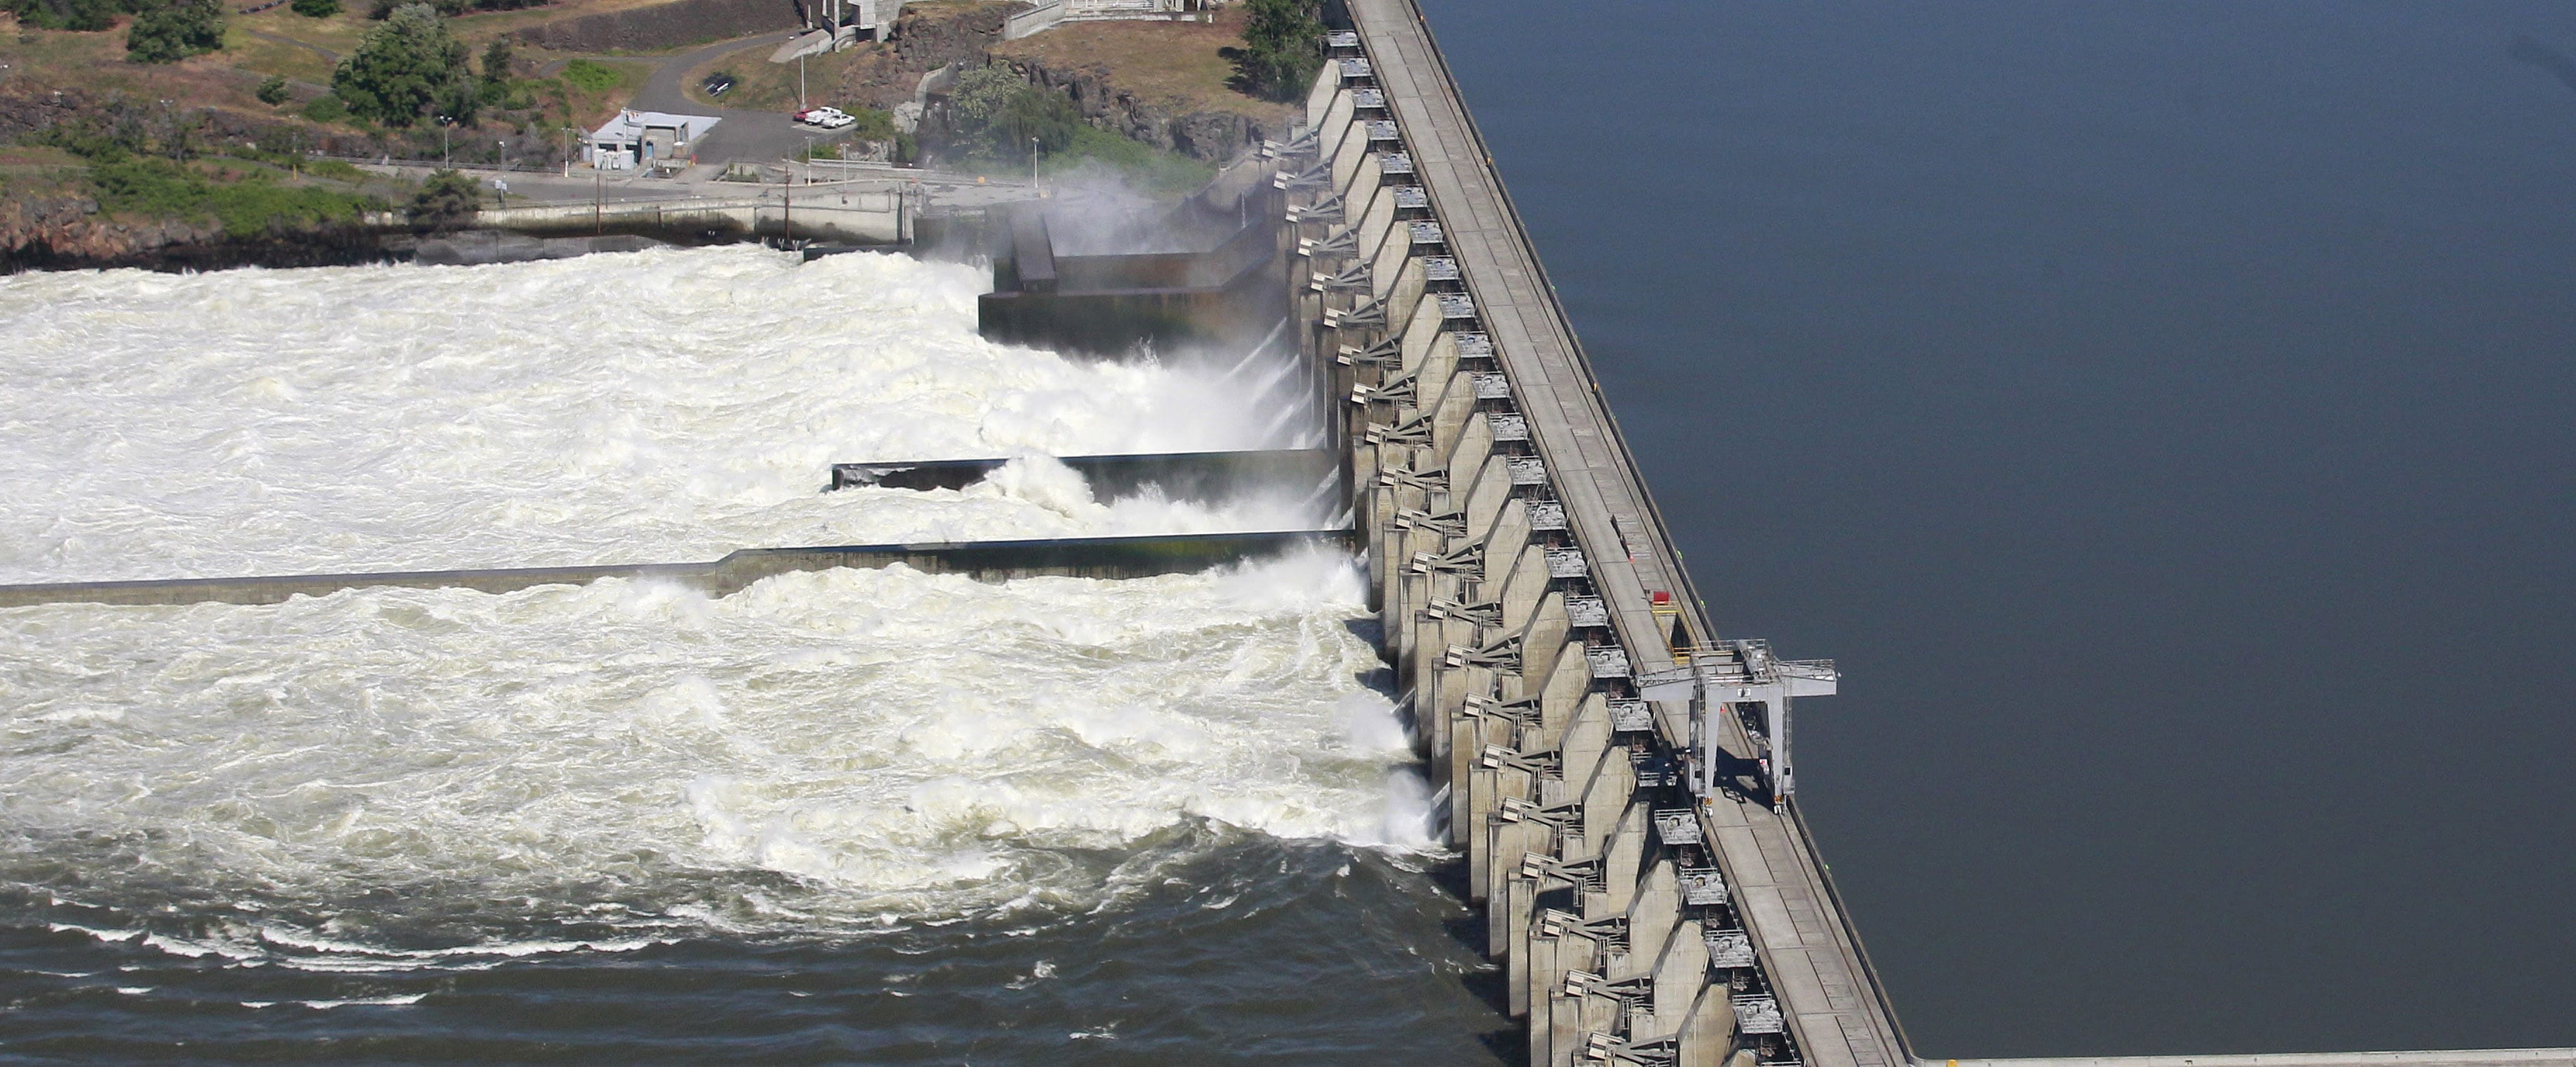 The Dalles Dam along the Columbia River, in The Dalles, Ore., is seen June 3, 2011.